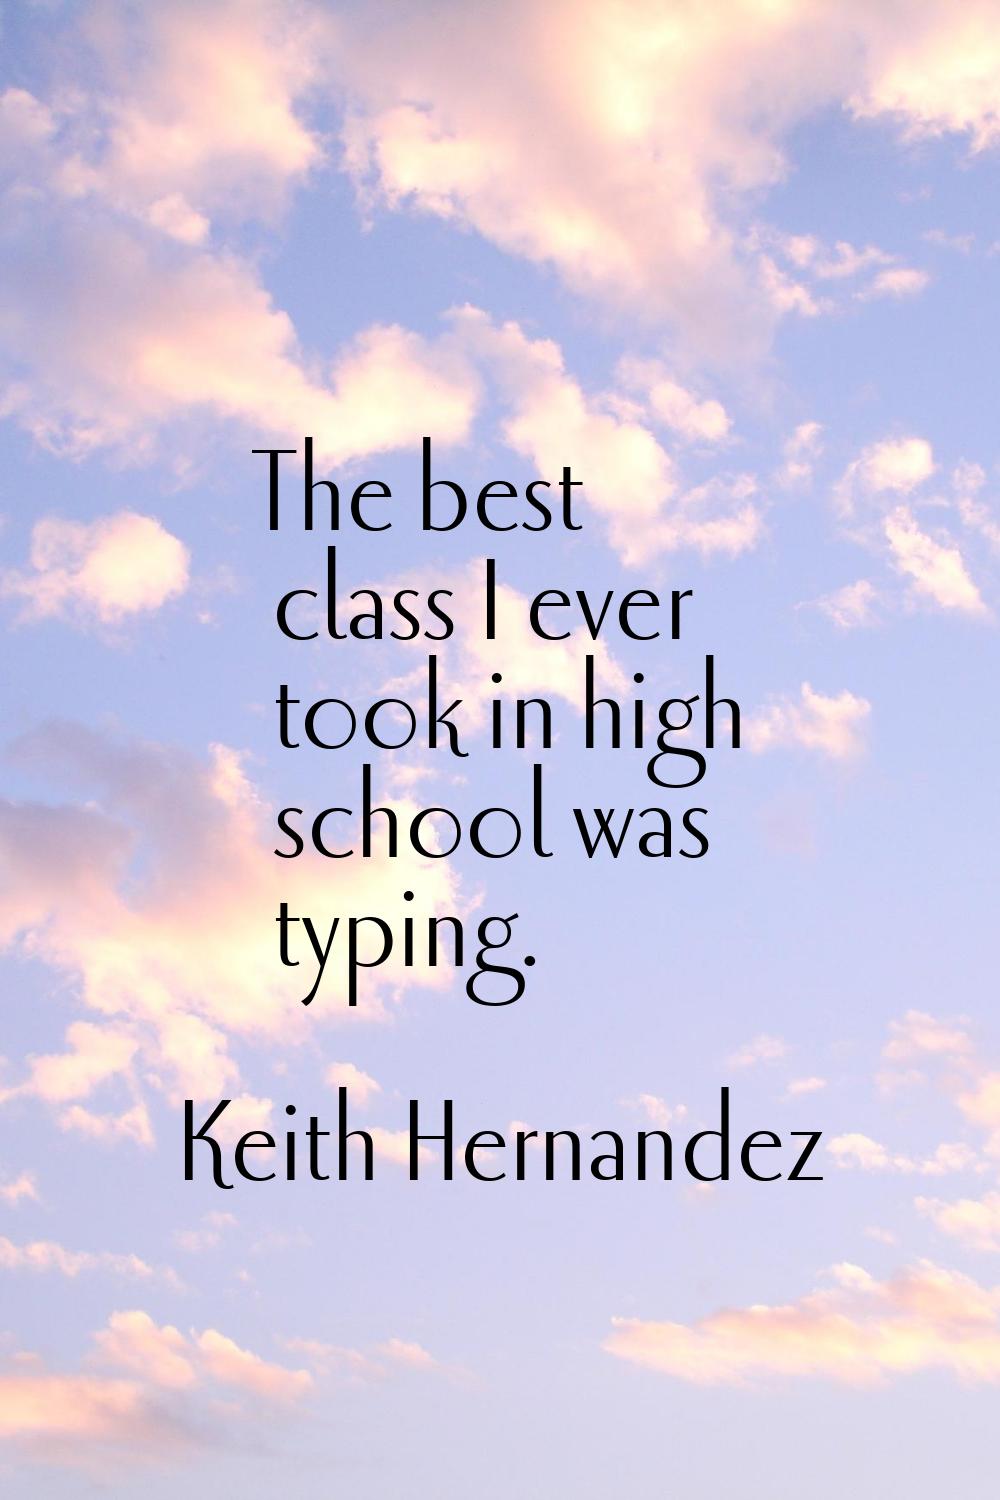 The best class I ever took in high school was typing.